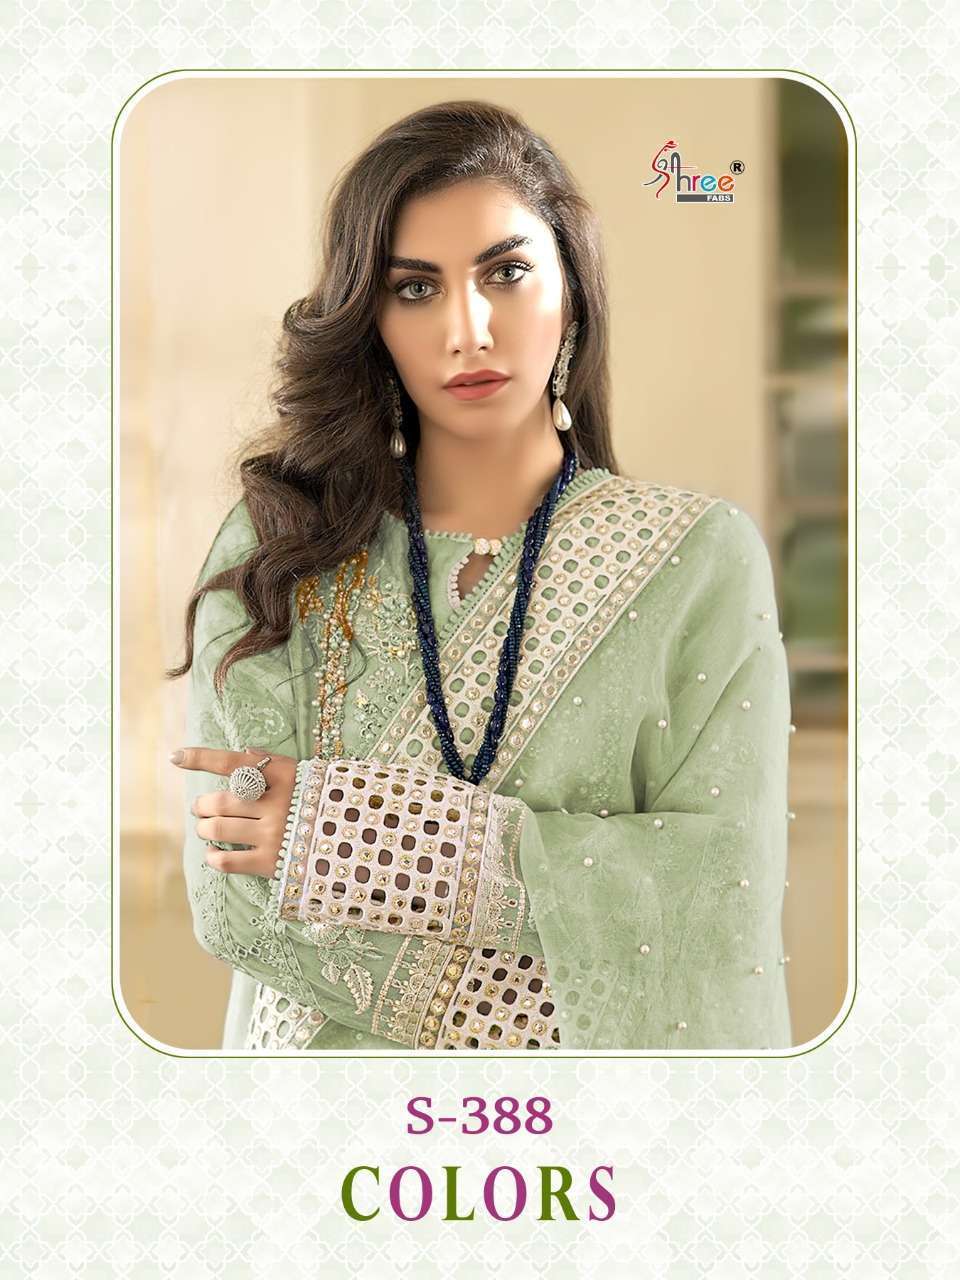 SHREE FAB PRESENTS S 388 COLORS HEAVY GEORGETTE EMBROIDERY WHOLESALE PAKISTANI SUITS